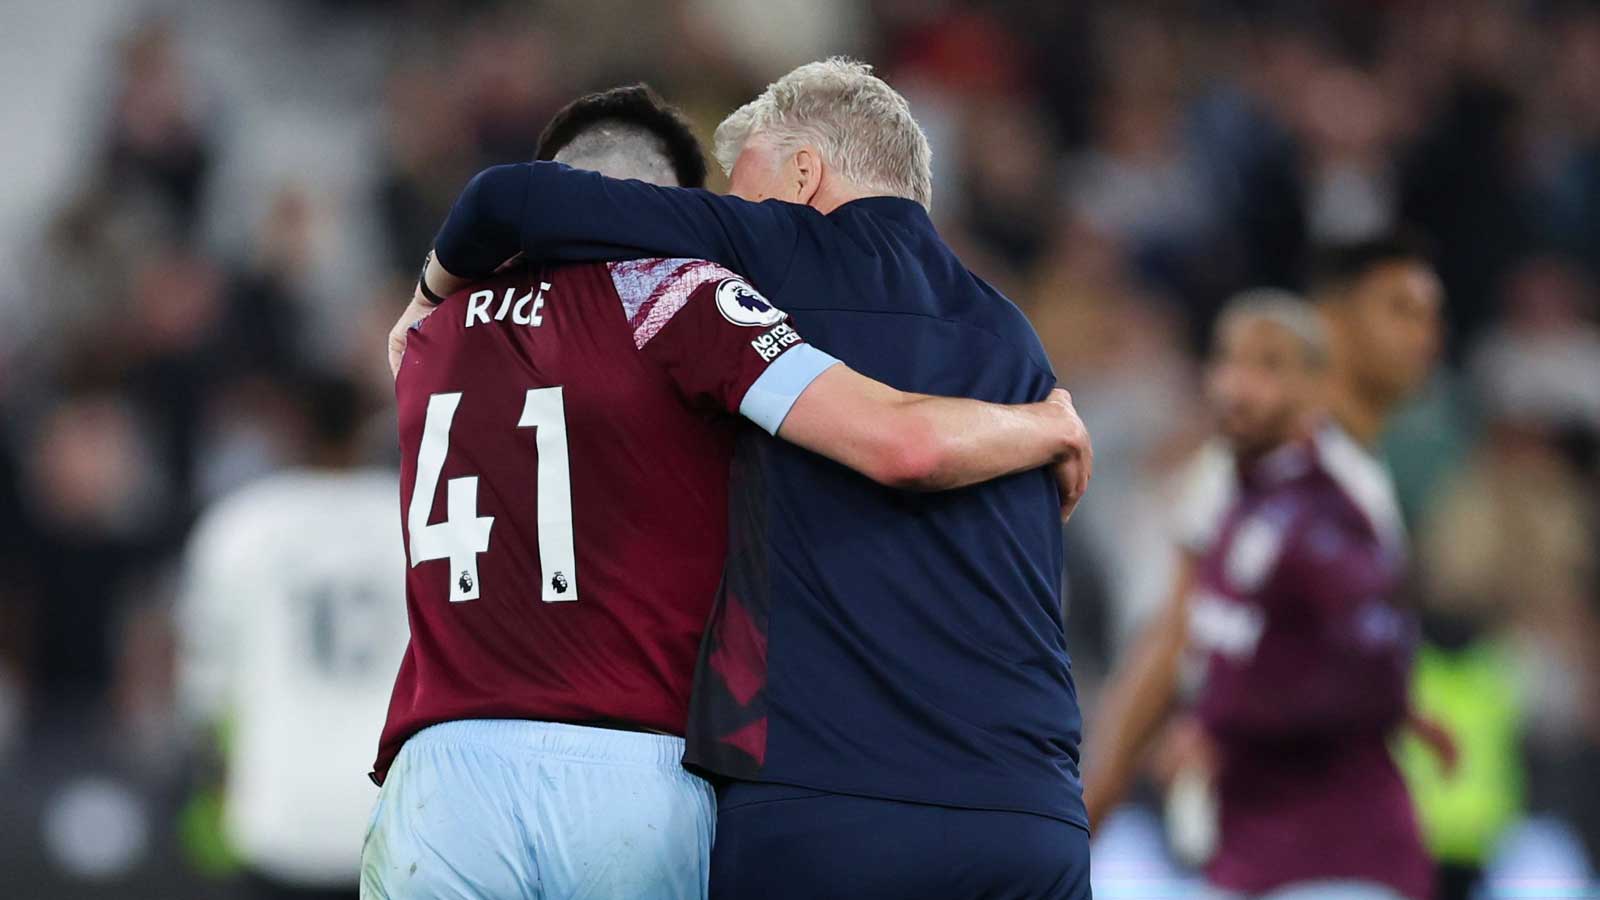 David Moyes embraces Declan Rice at full-time against Manchester United